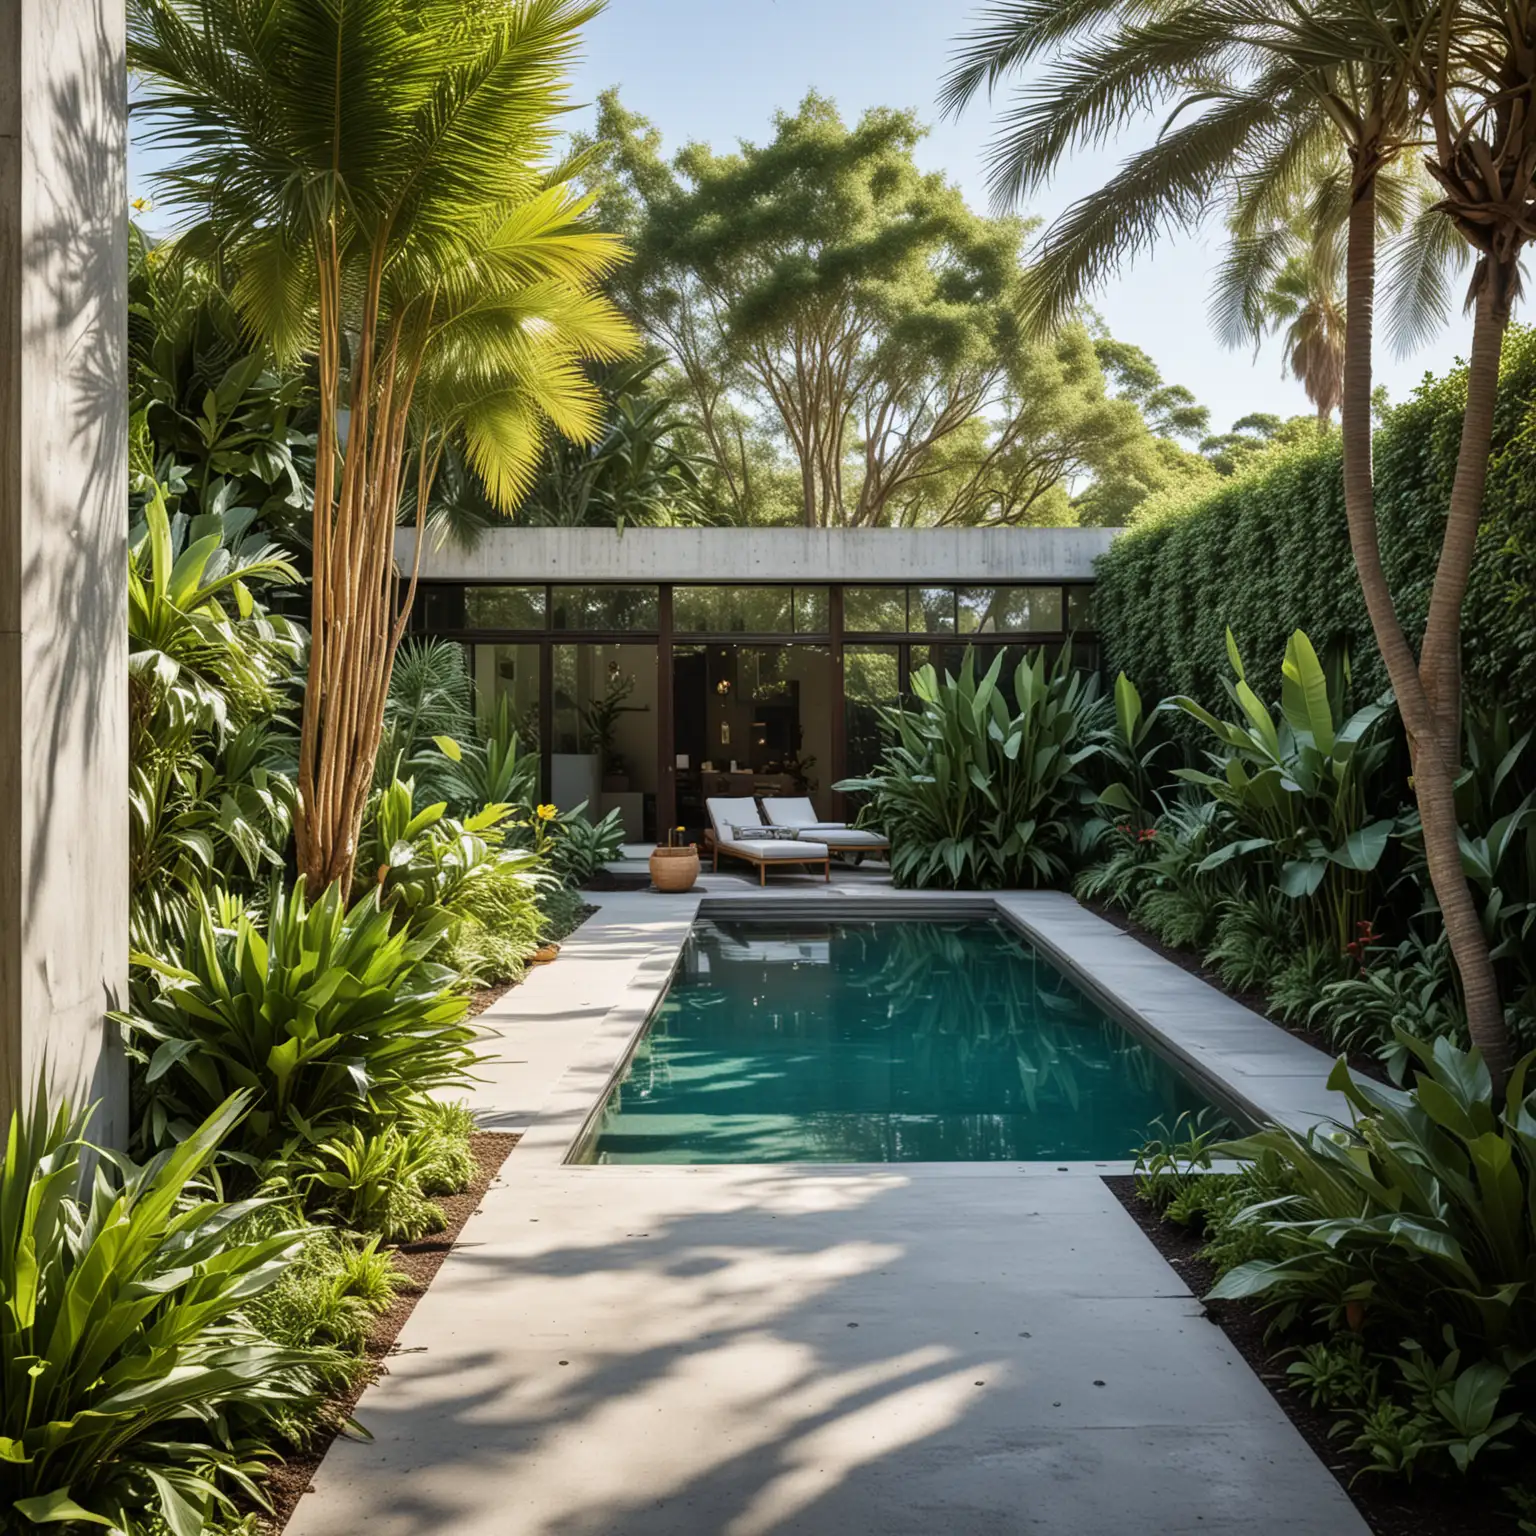 a long shot of modern outdoor garden with a symmetrical layout centered around a large rectangular reflecting pool. Incorporate tall palm trees and bird-of-paradise plants for a tropical touch. Use smooth concrete for the pathways and integrate a minimalist wooden gate at the entrance. The garden includes a container house with a rooftop terrace, providing an elevated view of the lush greenery. Set this scene on a warm, sunny afternoon, with vibrant green foliage and the pool reflecting the clear blue sky, enhanced by strategically placed solar-powered lights.spaces.